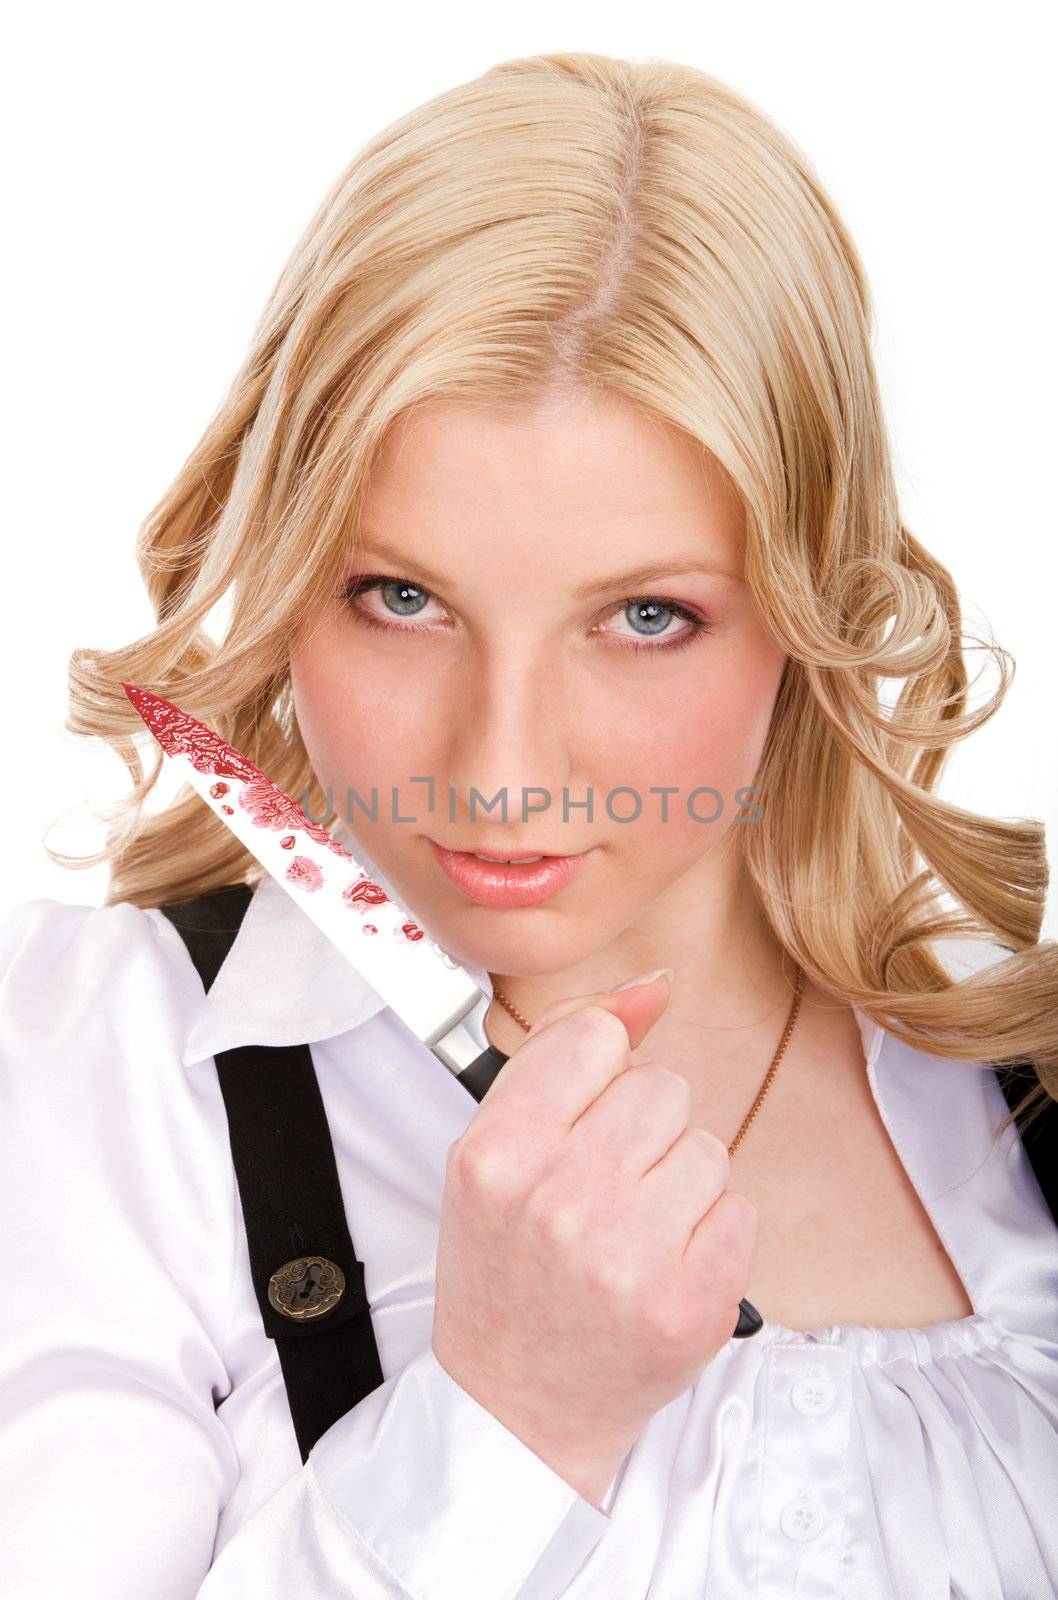 Young girl holding knife with blood on it by mihhailov